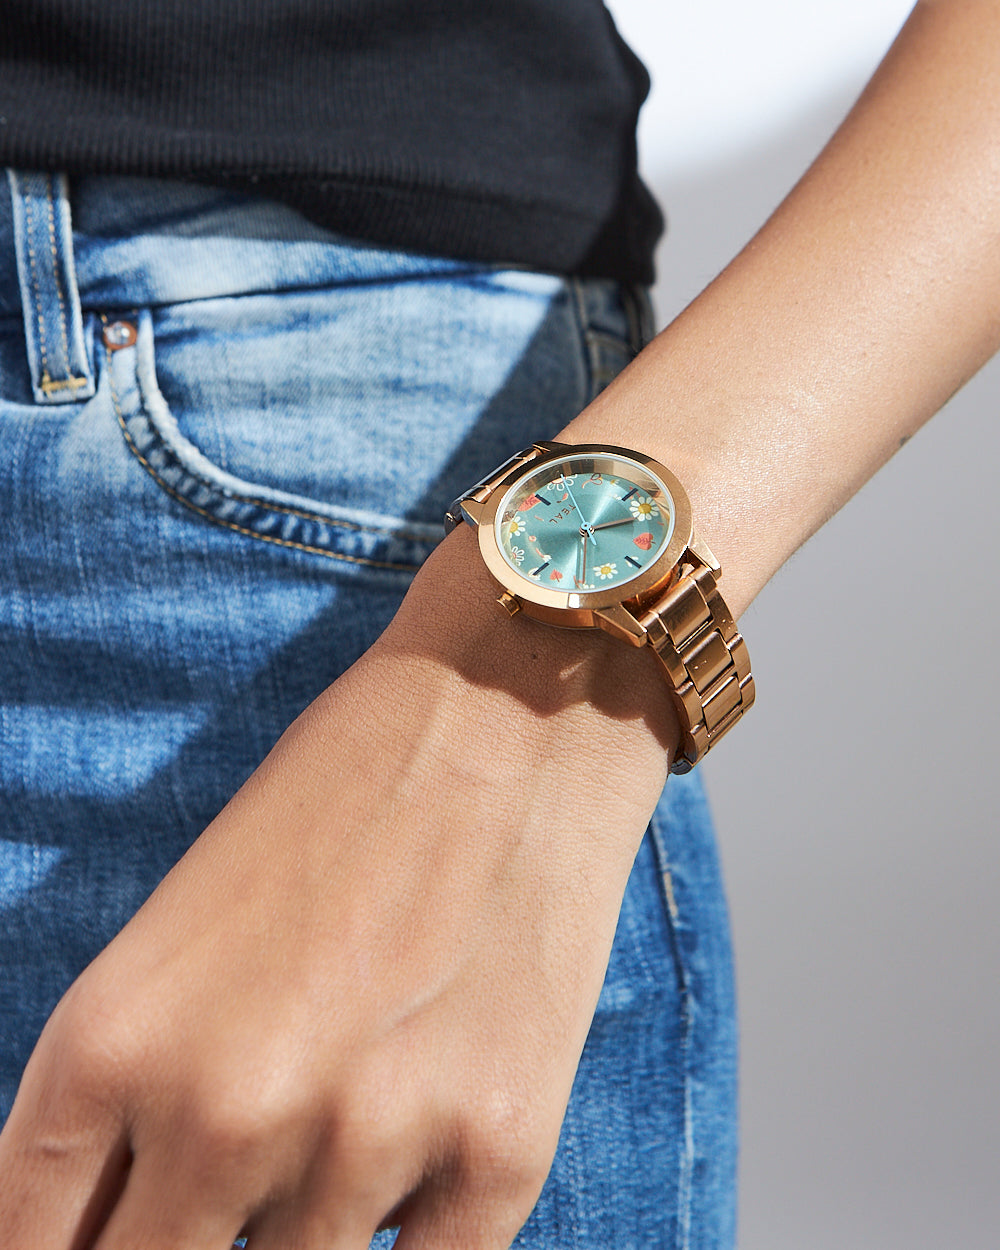 Teal by Chumbak Spring Watch | Metal  Link Strap - Rose Gold